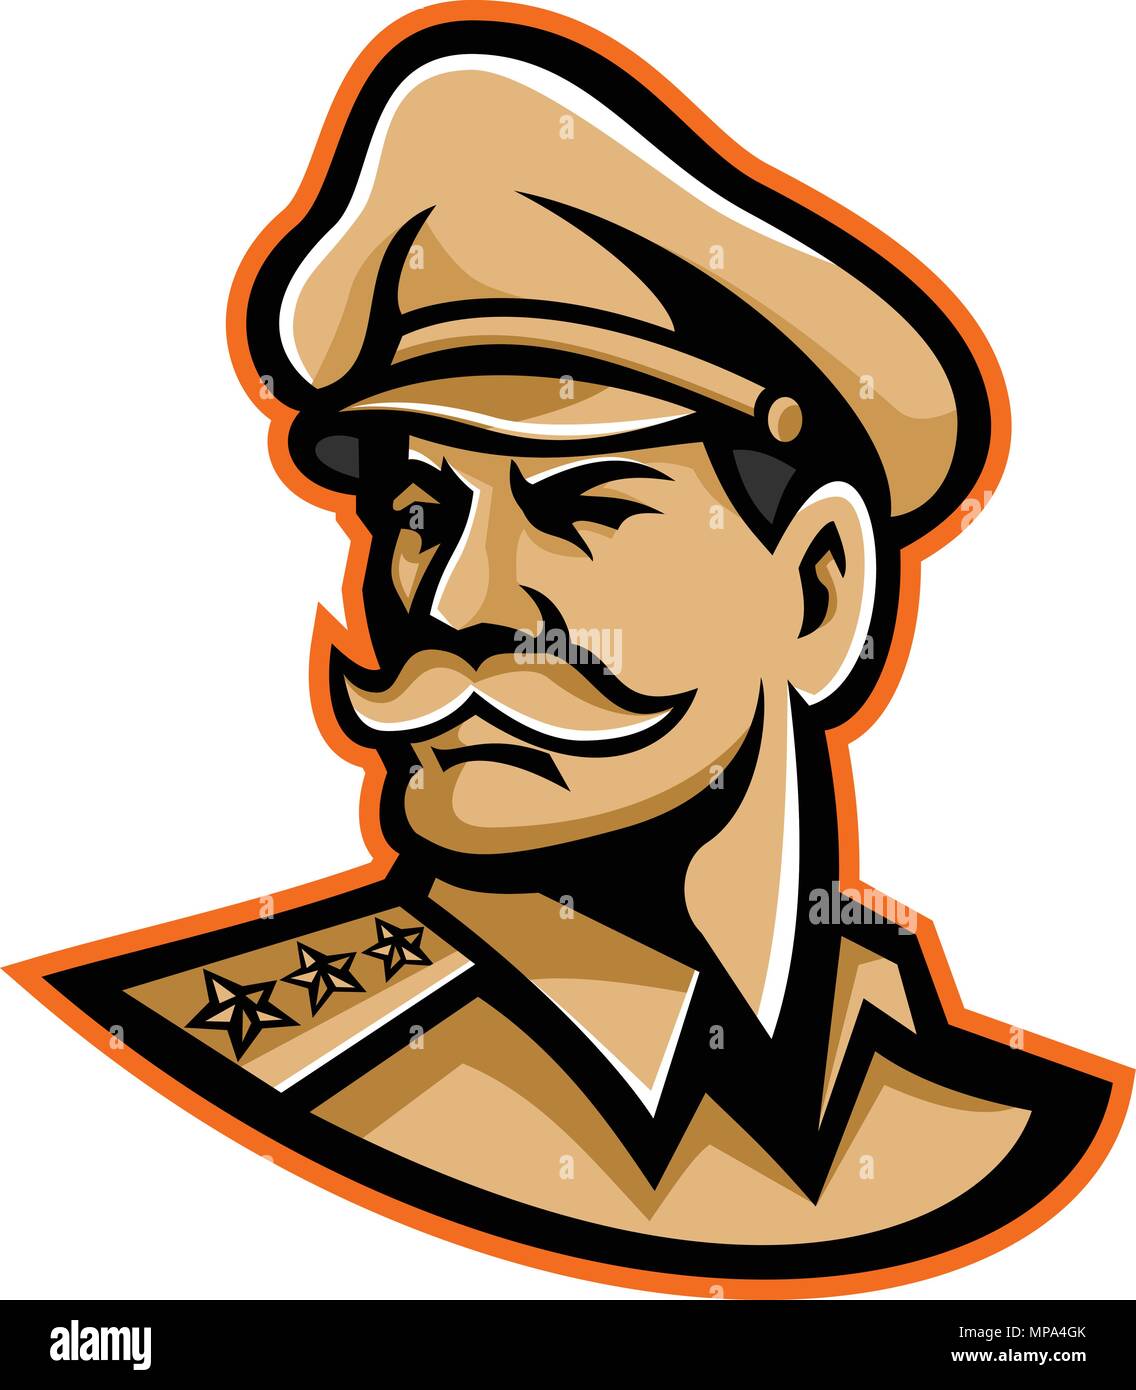 Mascot icon illustration of head of an American three-star general wearing a peaked cap looking forward viewed from side on isolated background in ret Stock Vector